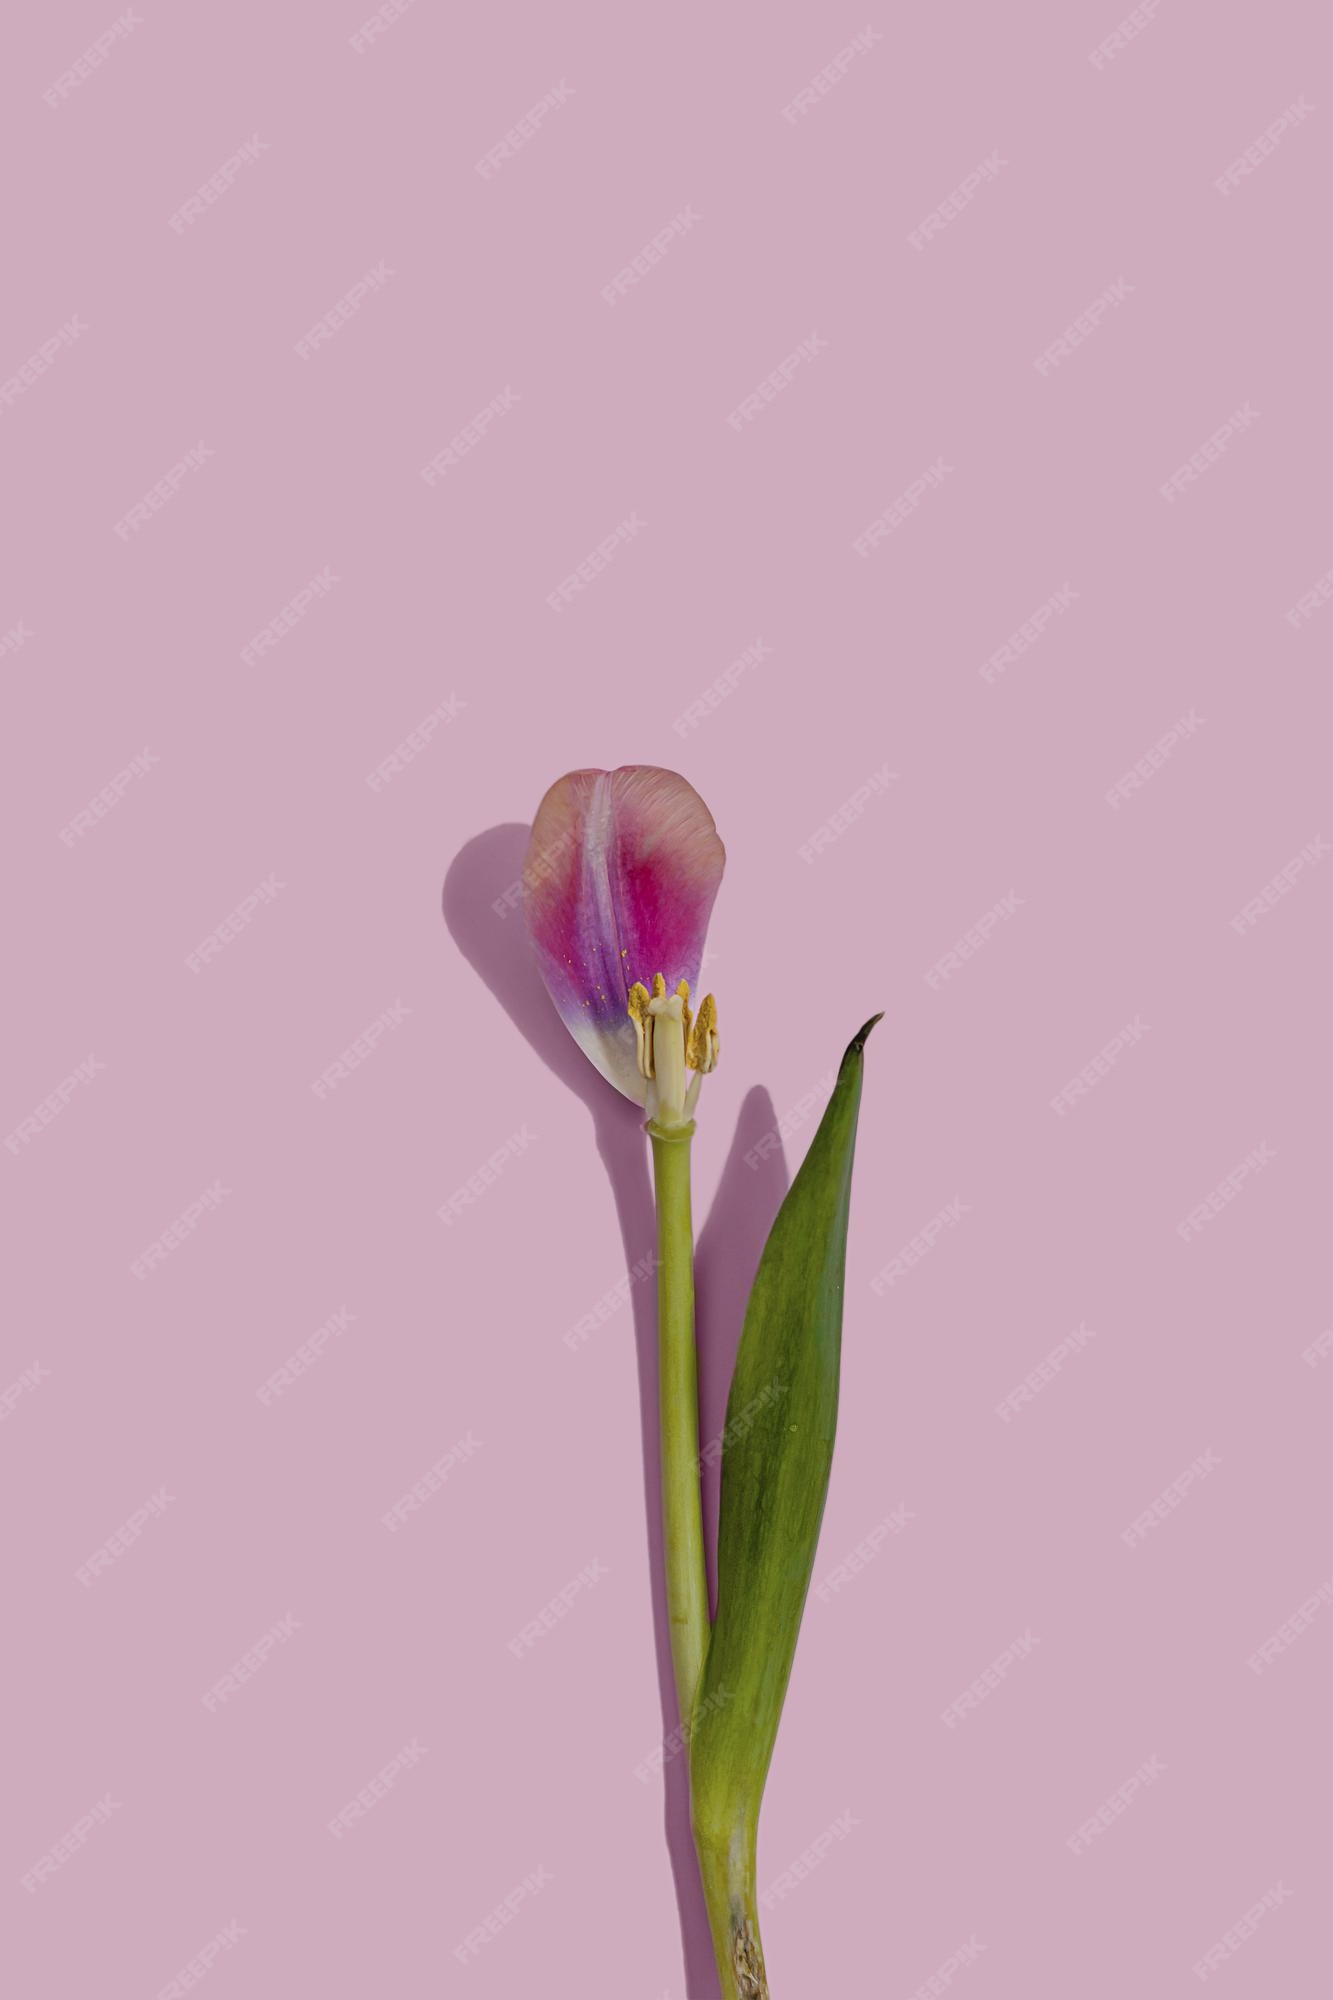 Premium Photo | Single wilted pink tulip flower with one petal with stamen  flat lay pattern on a pink minimal background with copy space nature  creative wallpaper idea idea of growth life